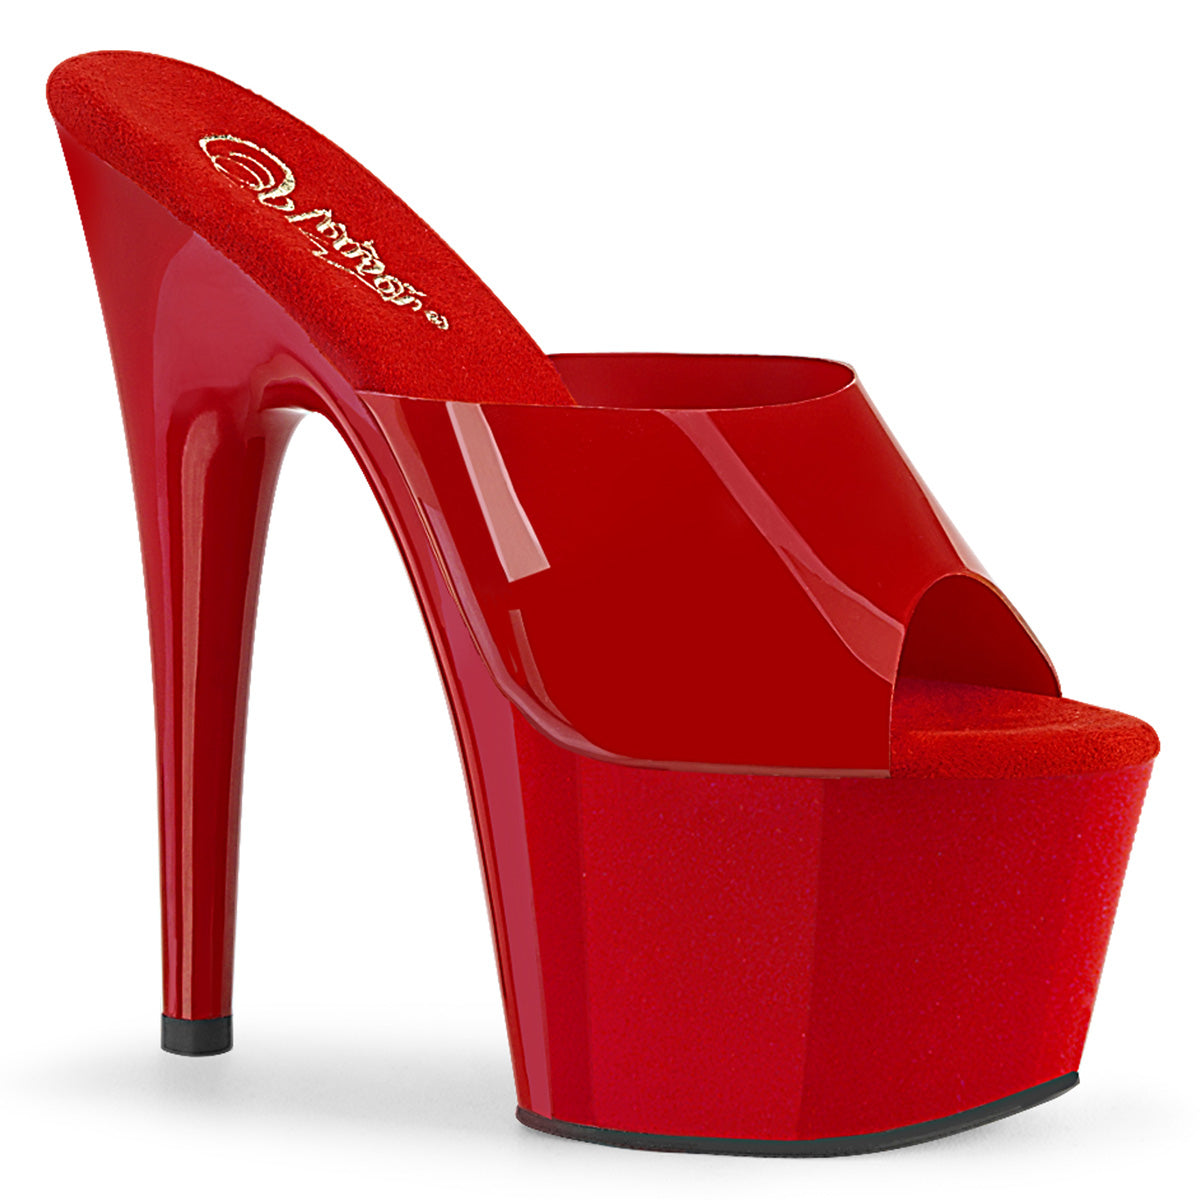 ADORE-701N Pleasers 7 Inch Heel Red Pole Dancing Shoes